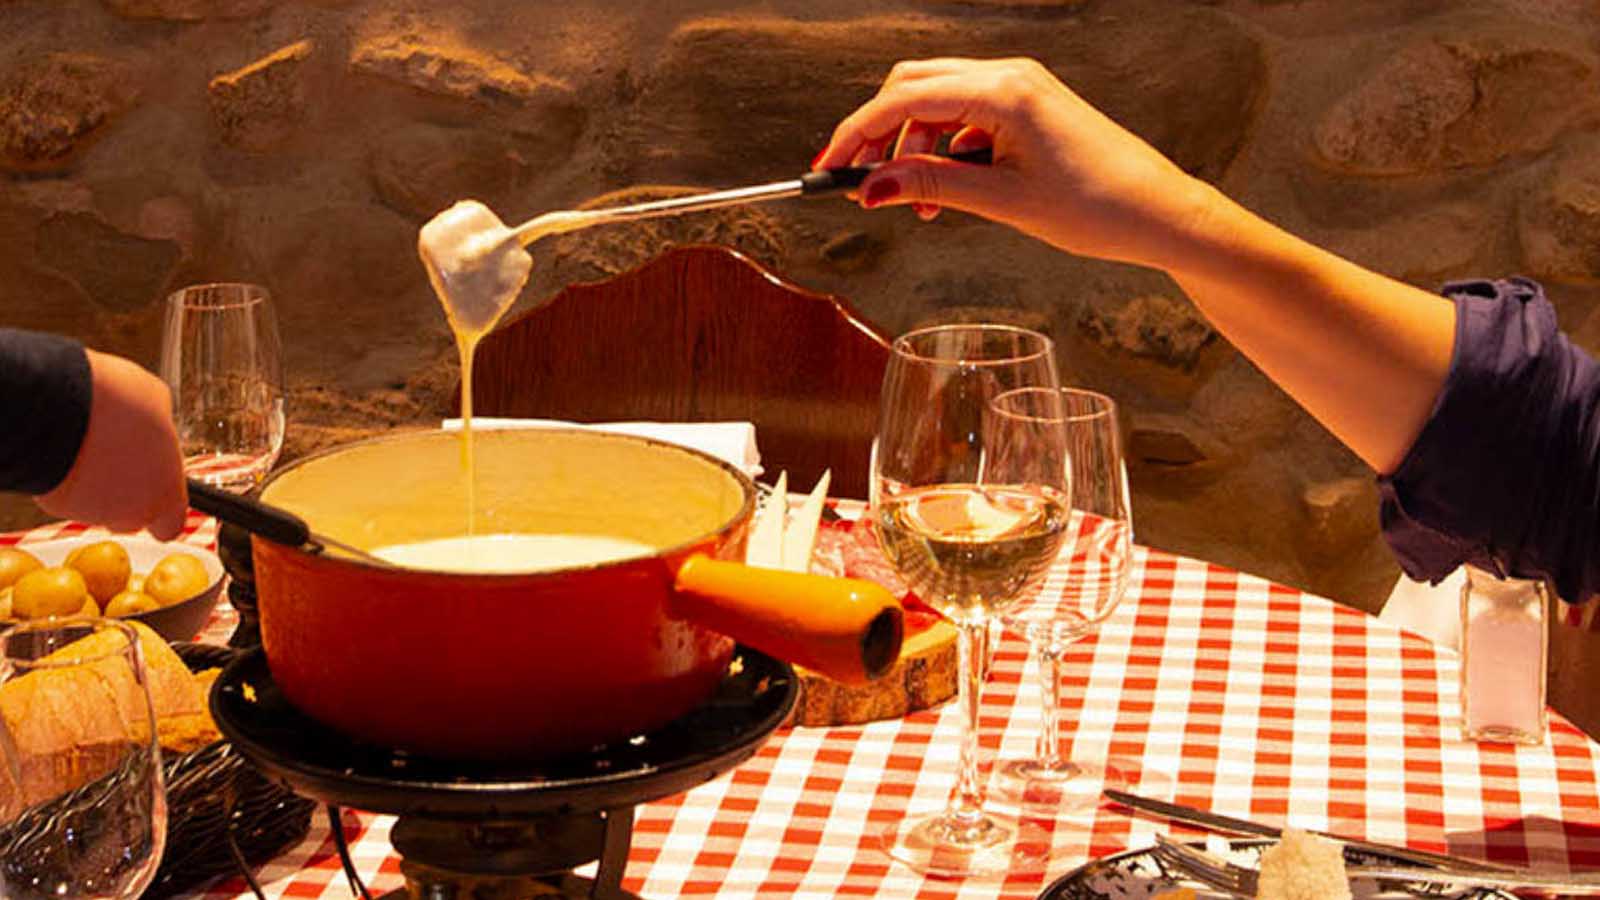 Hand holding a fork with bread over a red cheese fondue pan on a red and white checkmate tablecloth with a glass of white wine